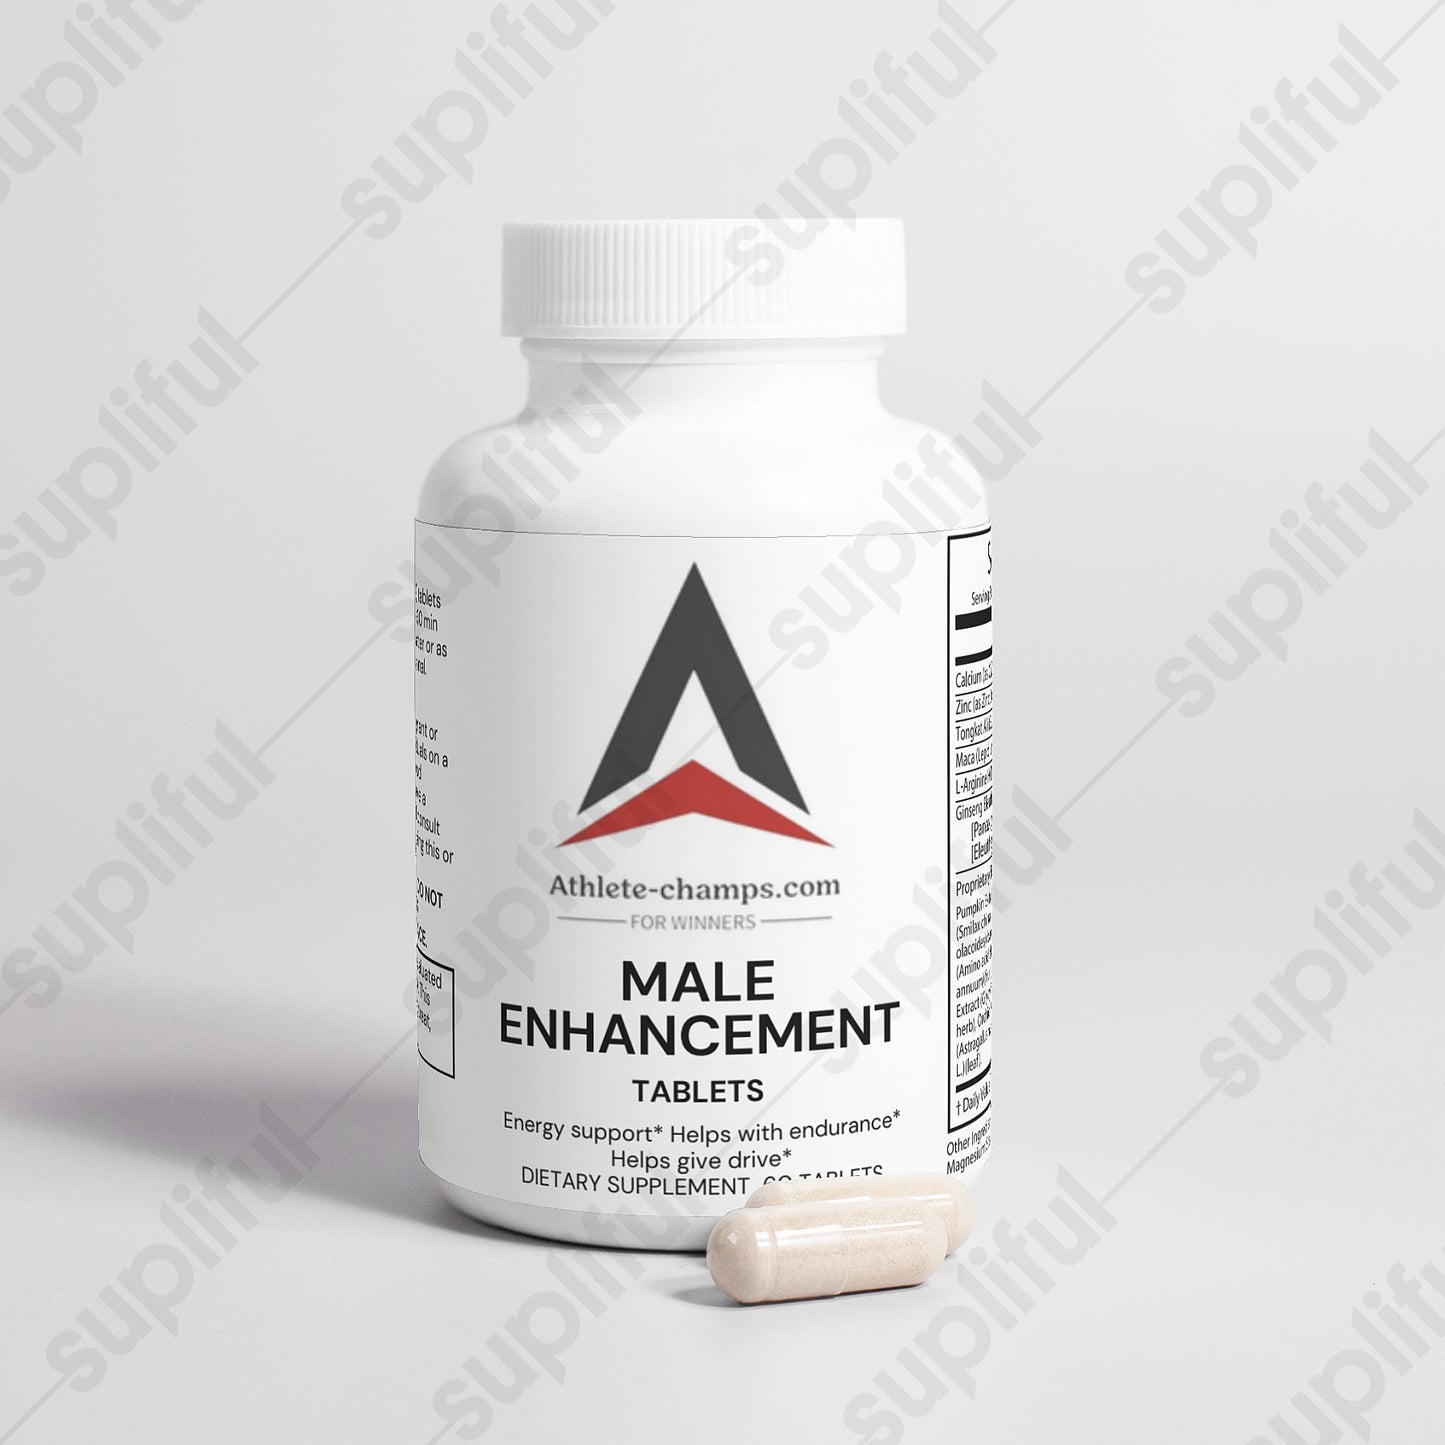 Male Enhancement experience libido issues for multiple reasons, be the